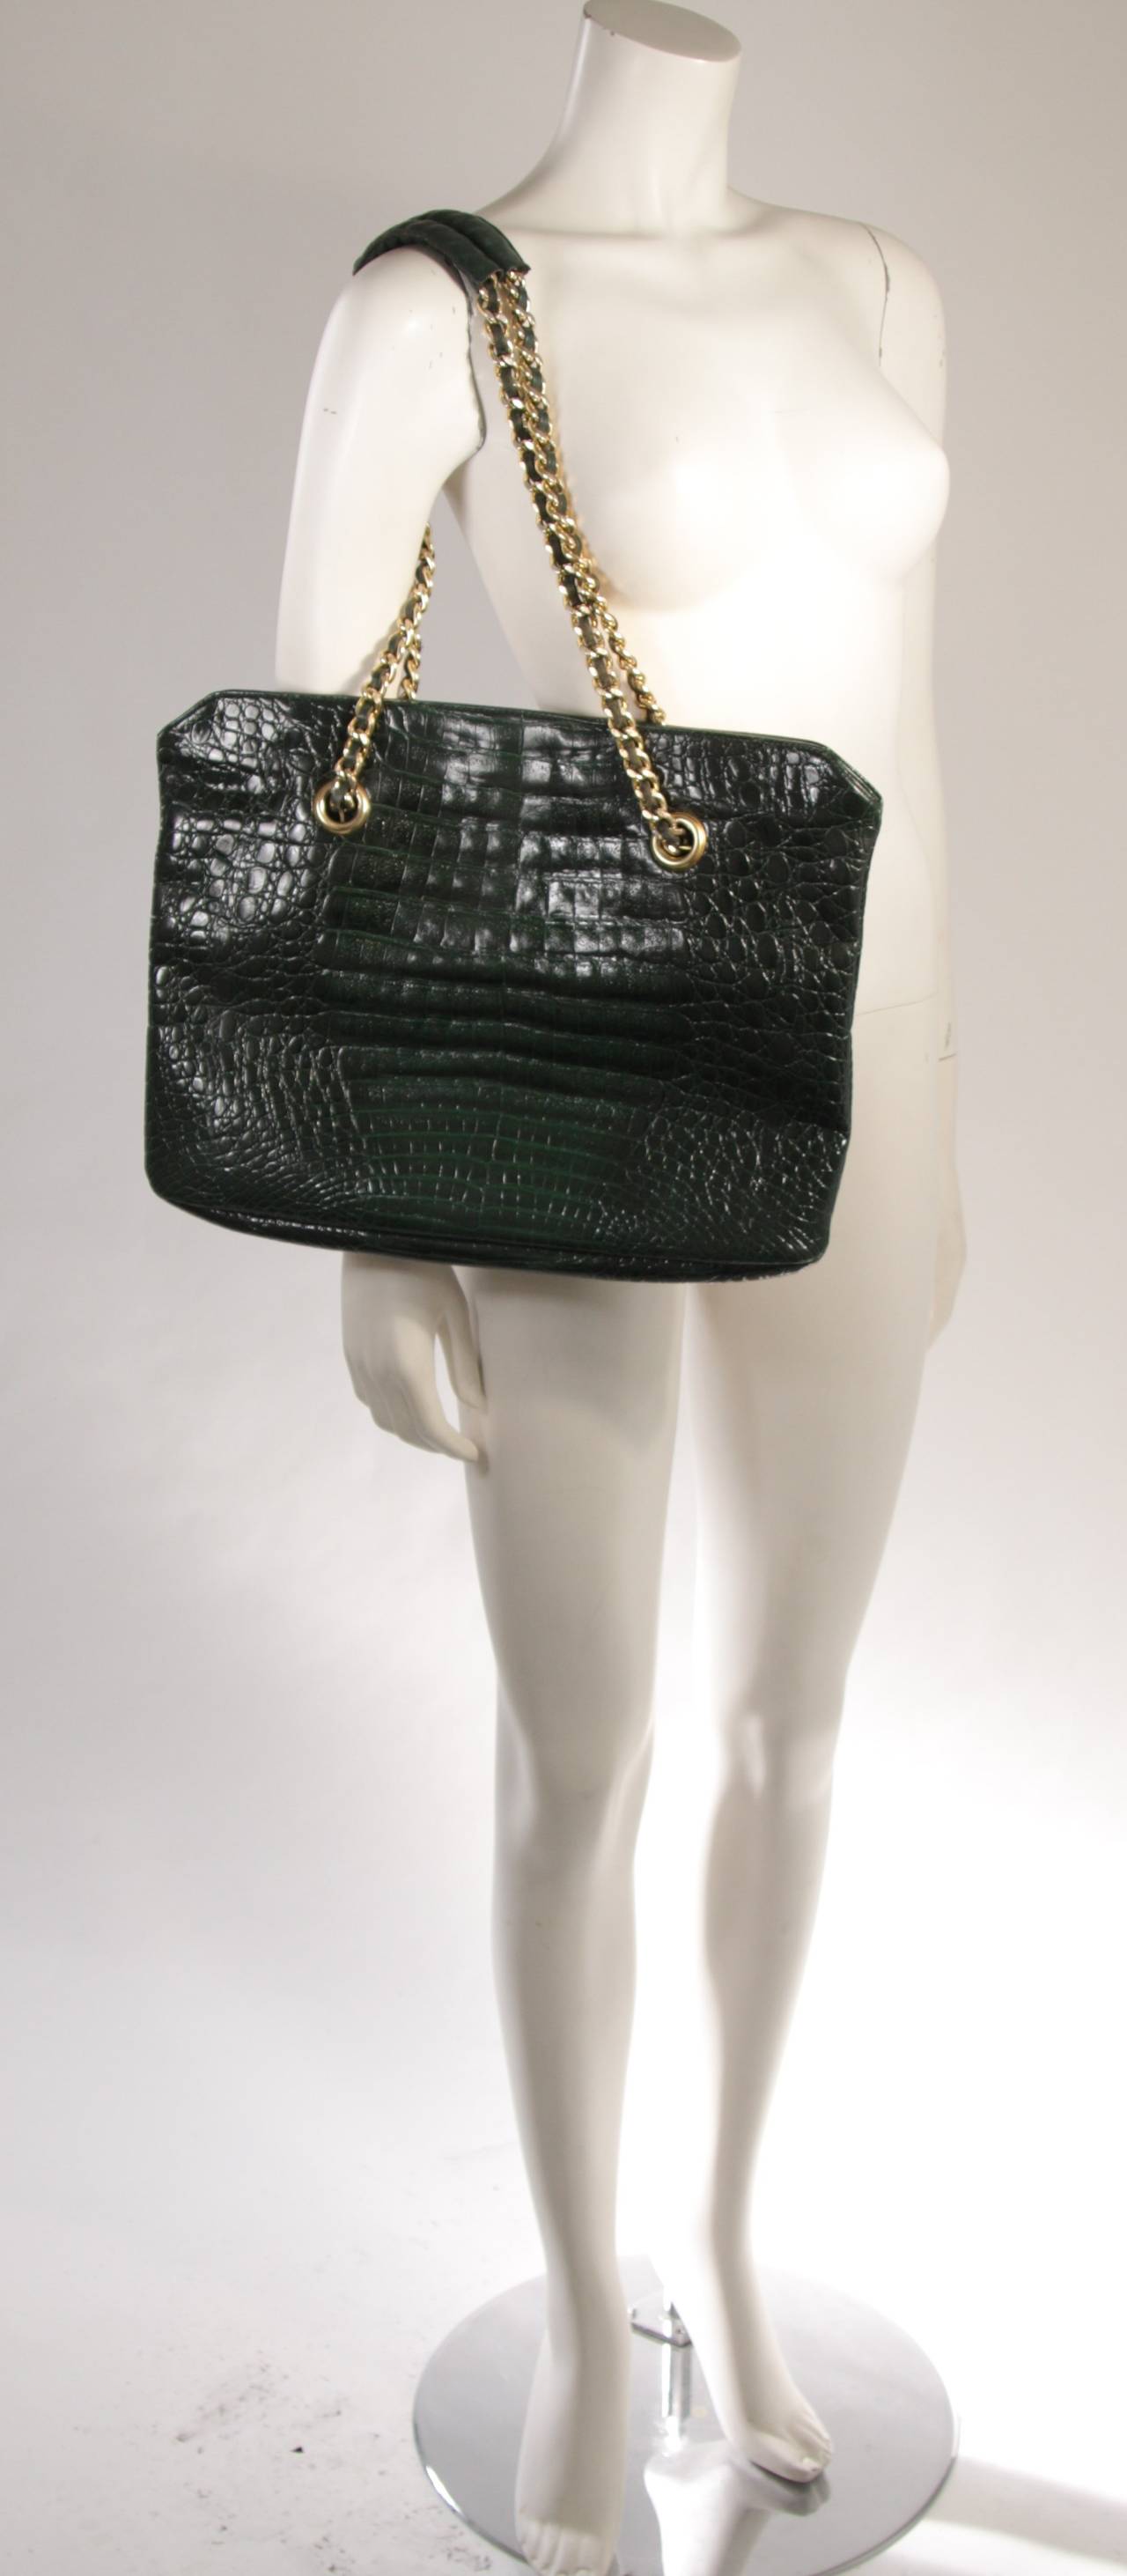 This La Bagagerie design is available for viewing at our Beverly Hills Boutique. This fabulous design features a double strap chain design with a top zipper closure and one interior zipper compartment. In great vintage condition. Made in France.